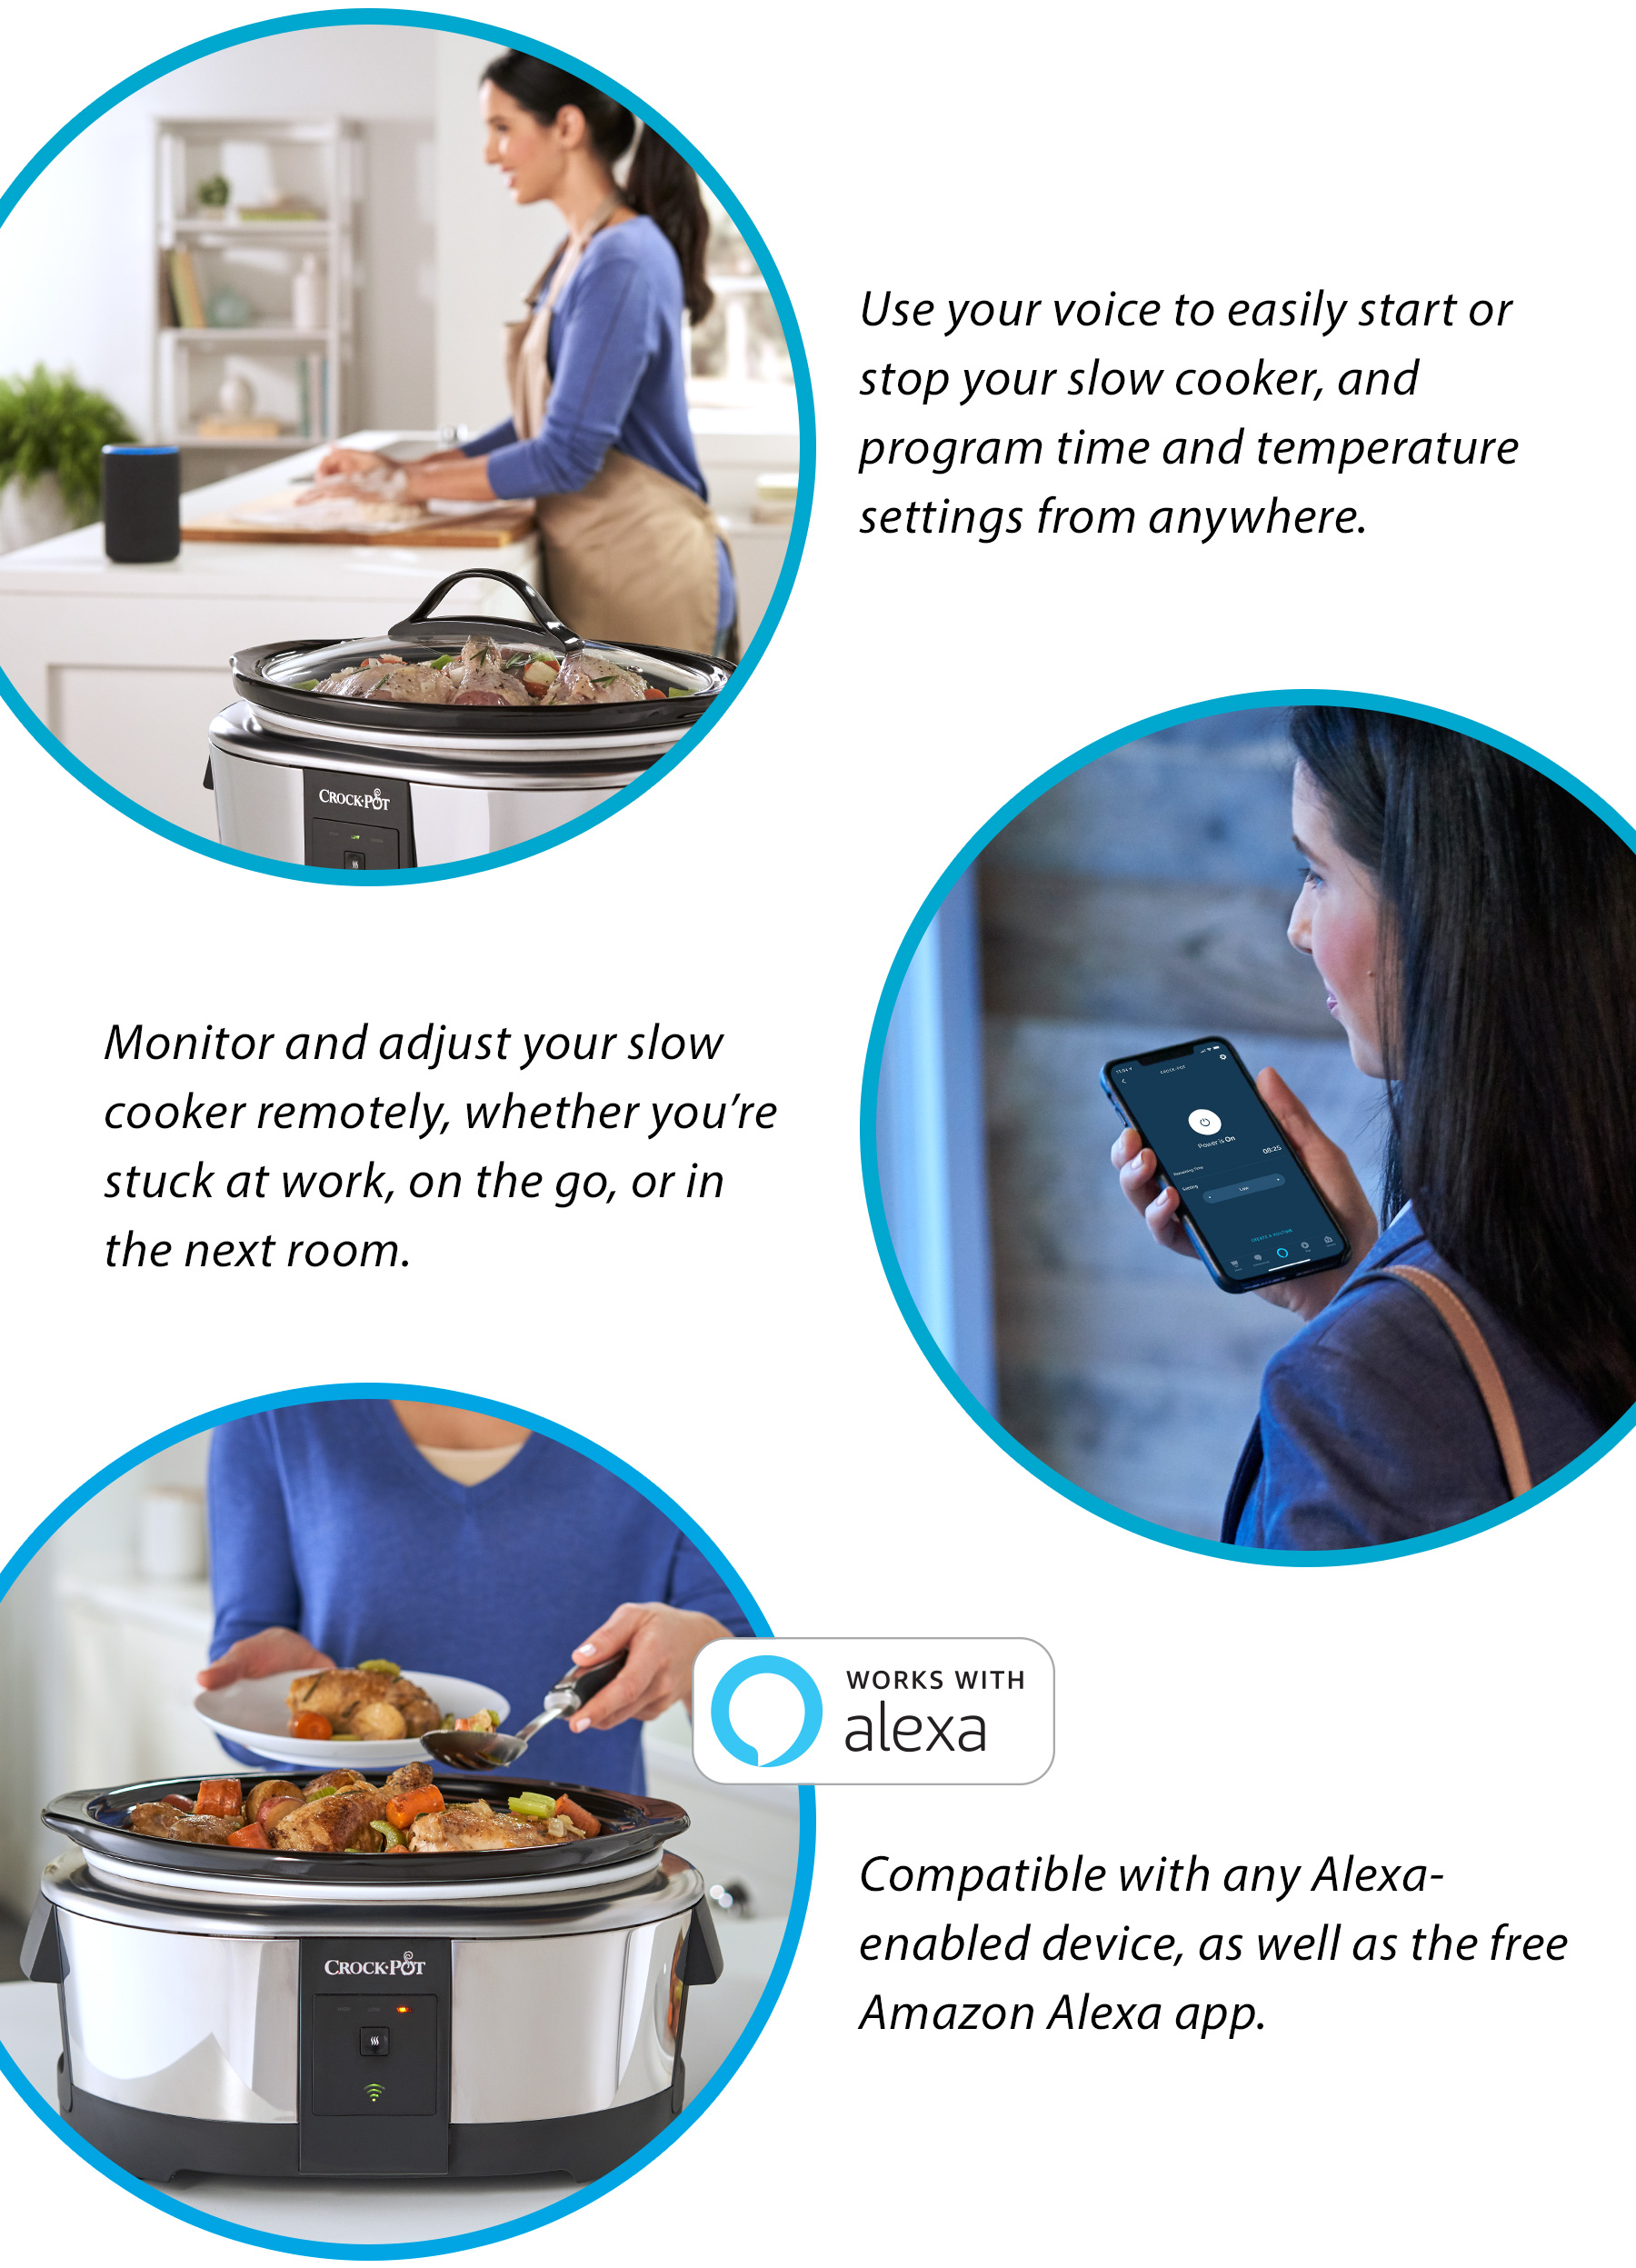 Use your voice to easily start or stop your slow cooker, and program time and temperature settings from anywhere